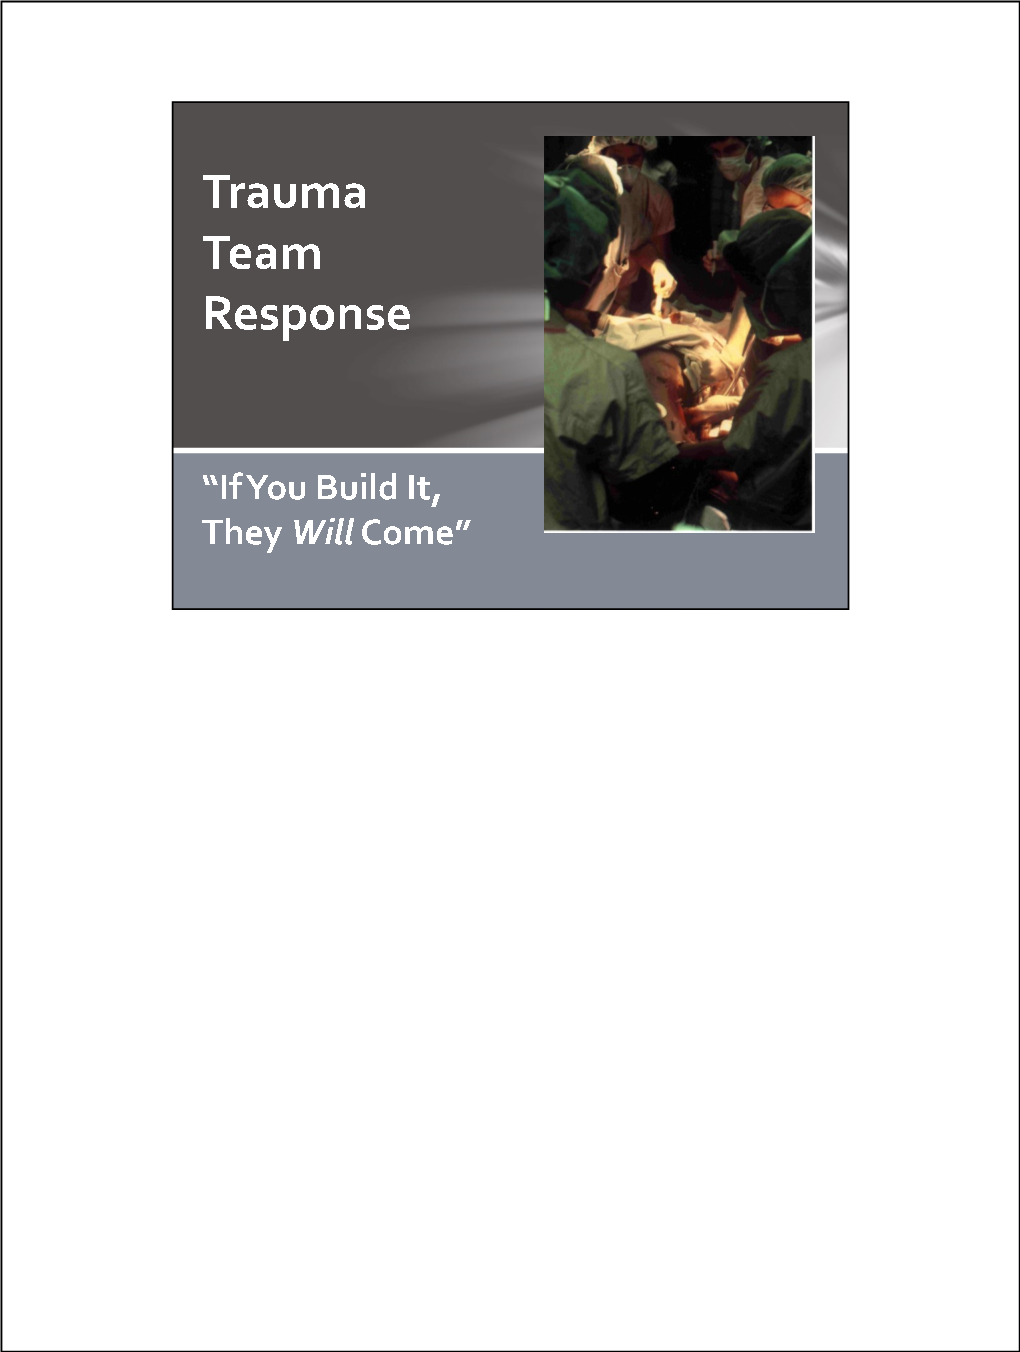 Why Have a Trauma Team Response? Organization and Delivery of Resources Optimizes the Episodic Critical Care of the Injured Patient